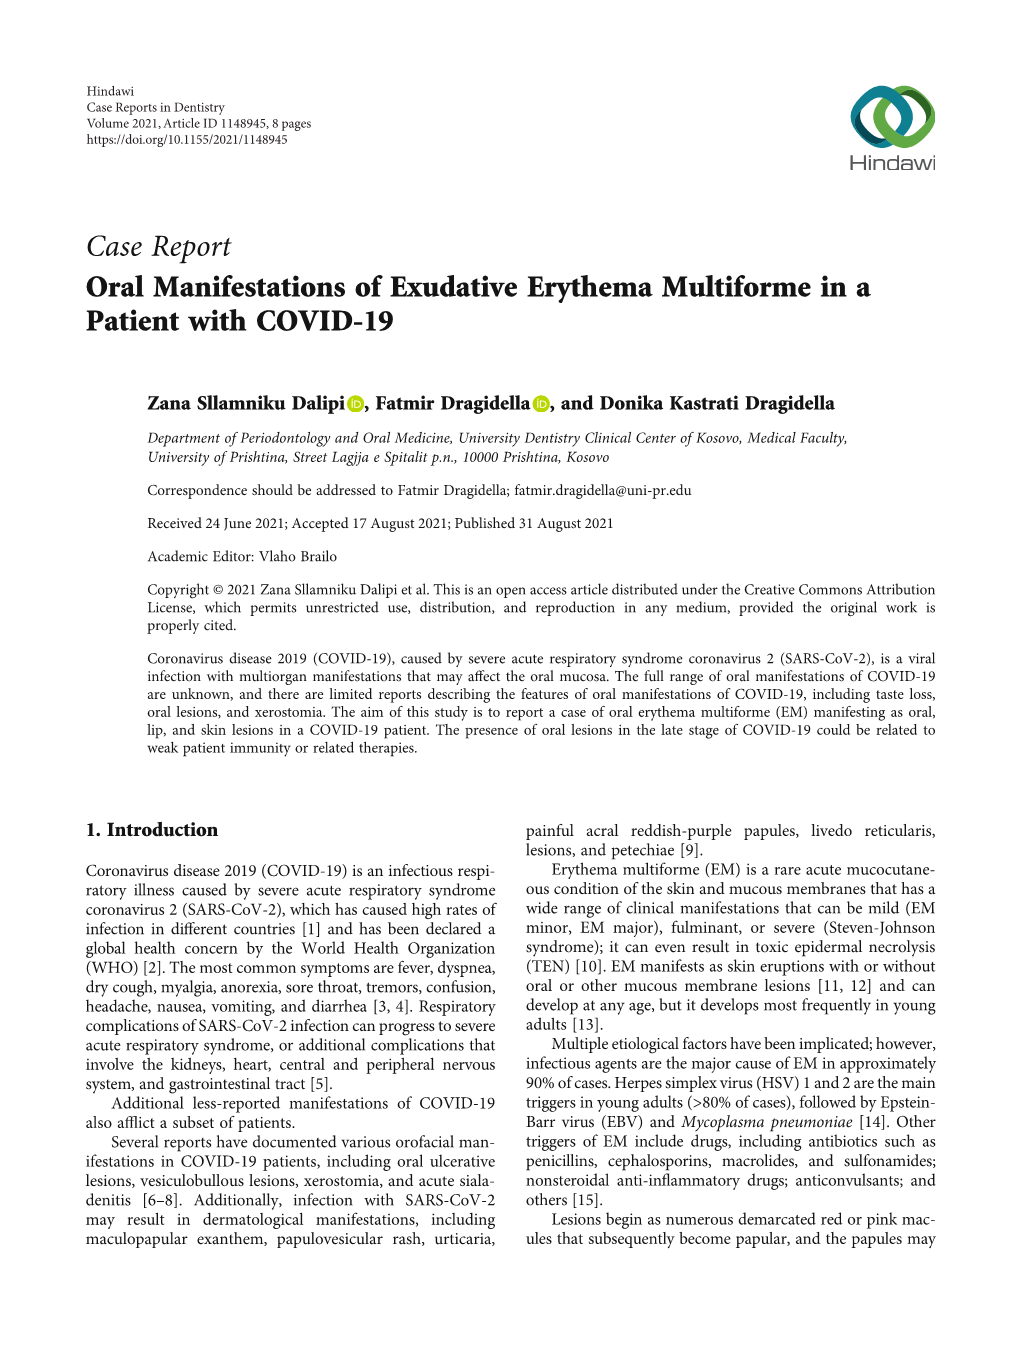 Case Report Oral Manifestations of Exudative Erythema Multiforme in a Patient with COVID-19